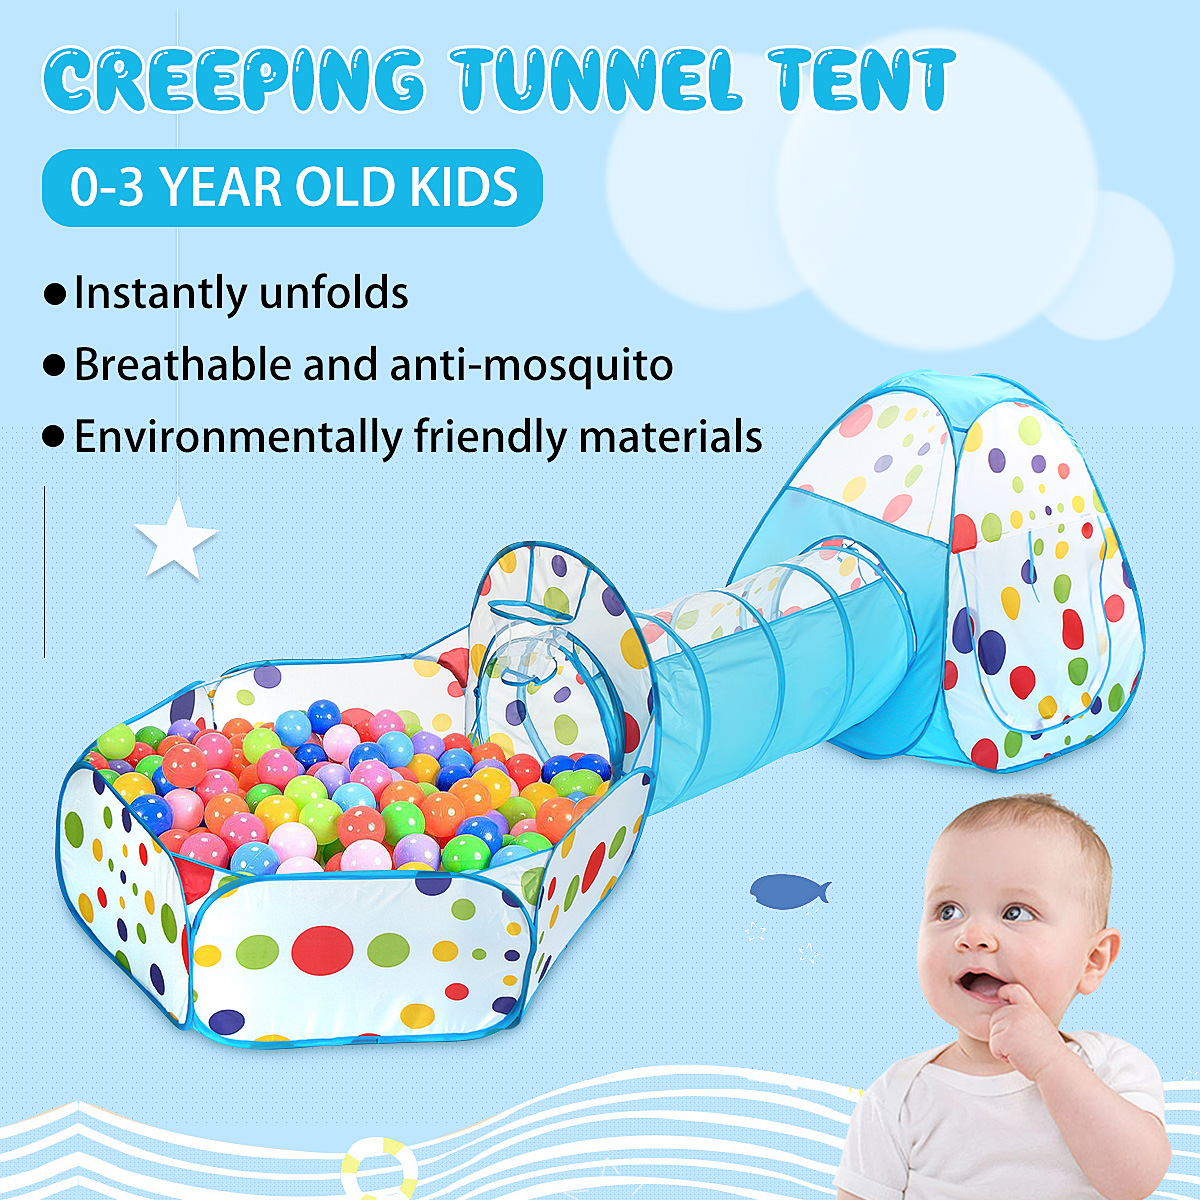 Baby-Creeping-Tunnel-Tent-Play-Game-Toys-for-0-3-Year-Old-Kids-Perfect-Gift-1676970-2